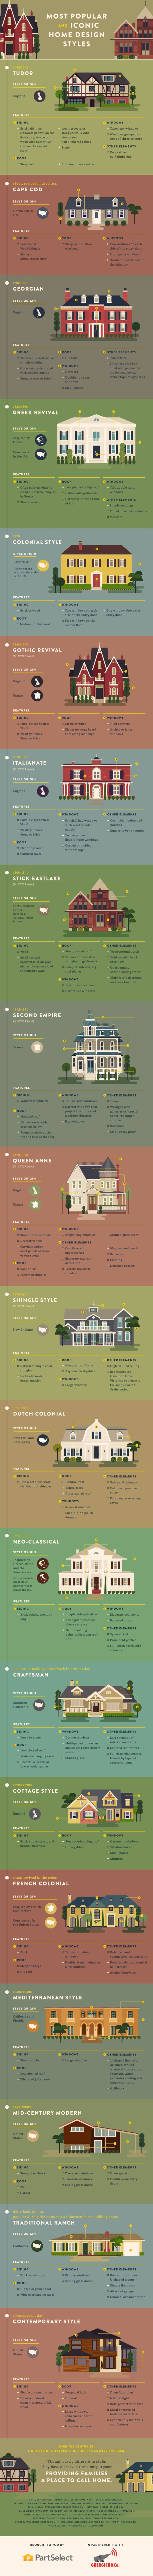 most-popular-and-iconic-home-design-styles